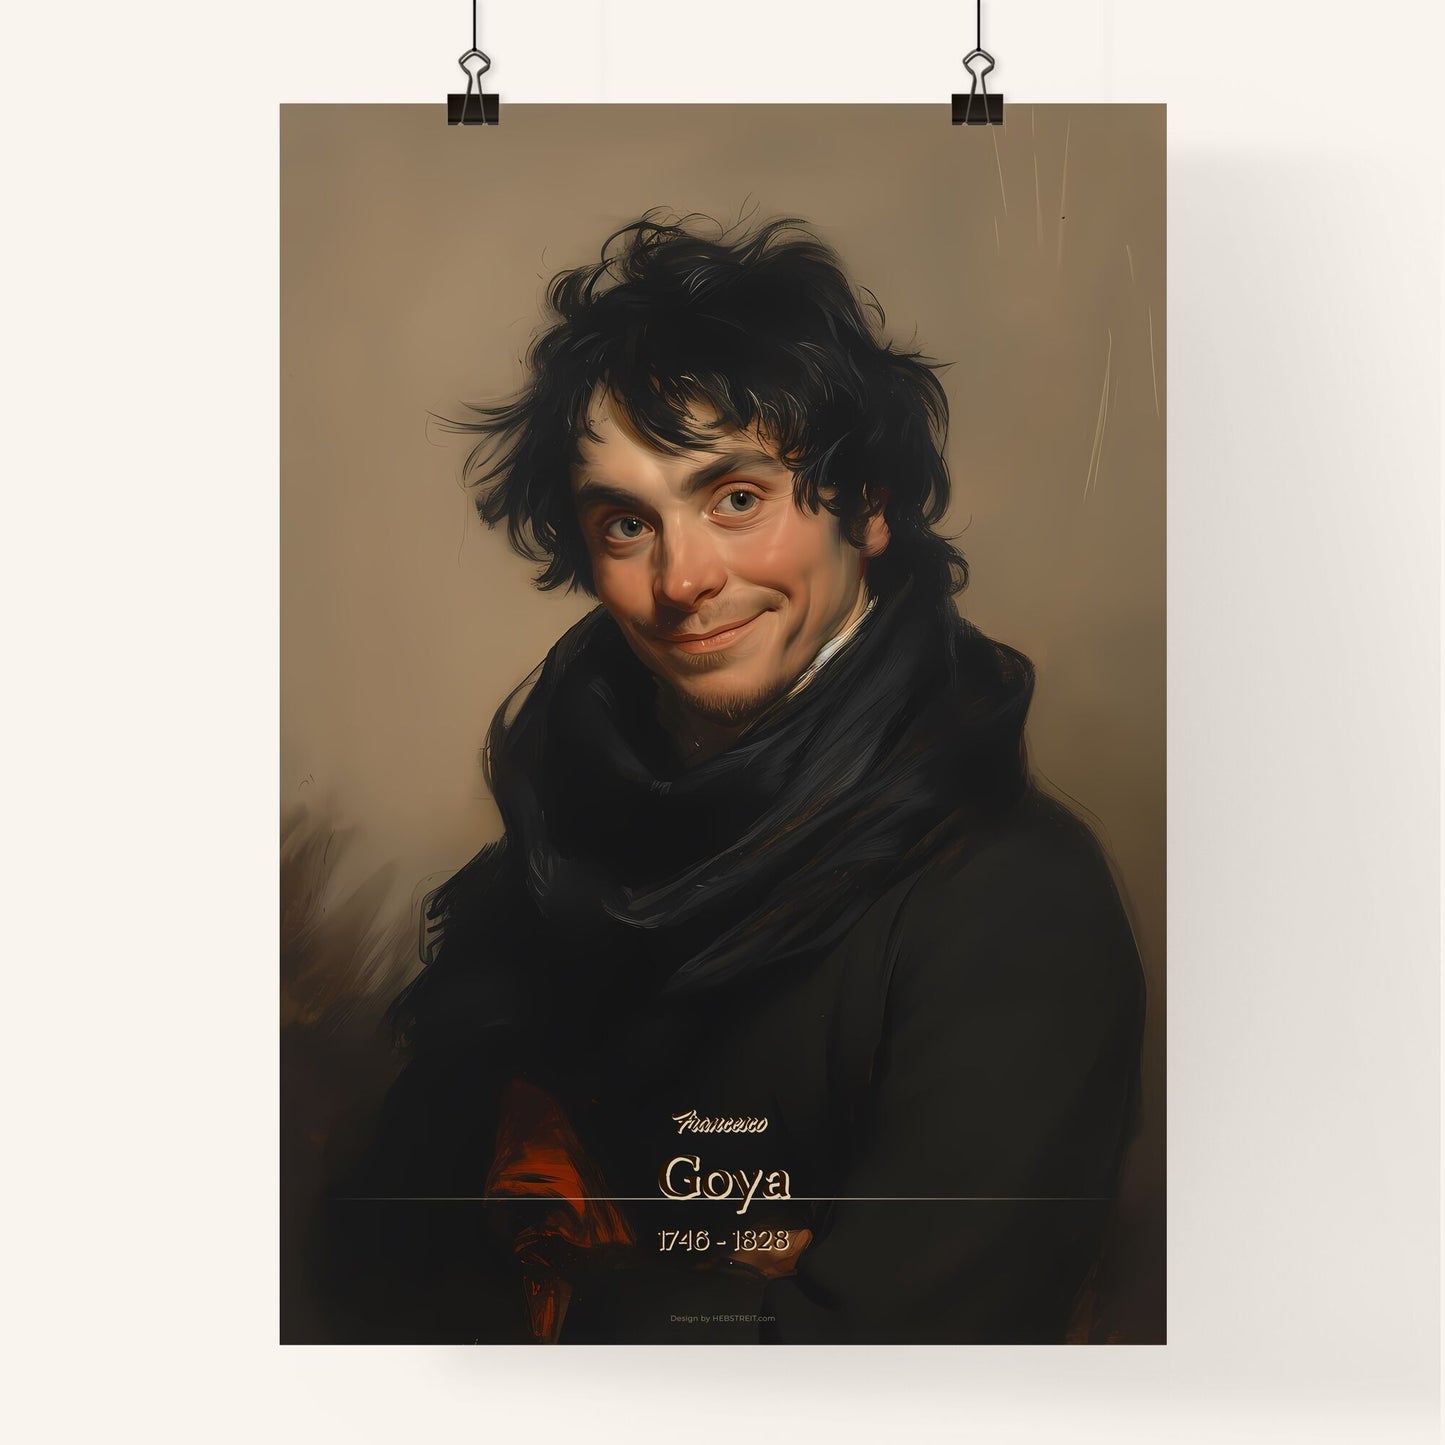 Francesco, Goya, 1746 - 1828, A Poster of a man with black hair and a scarf Default Title